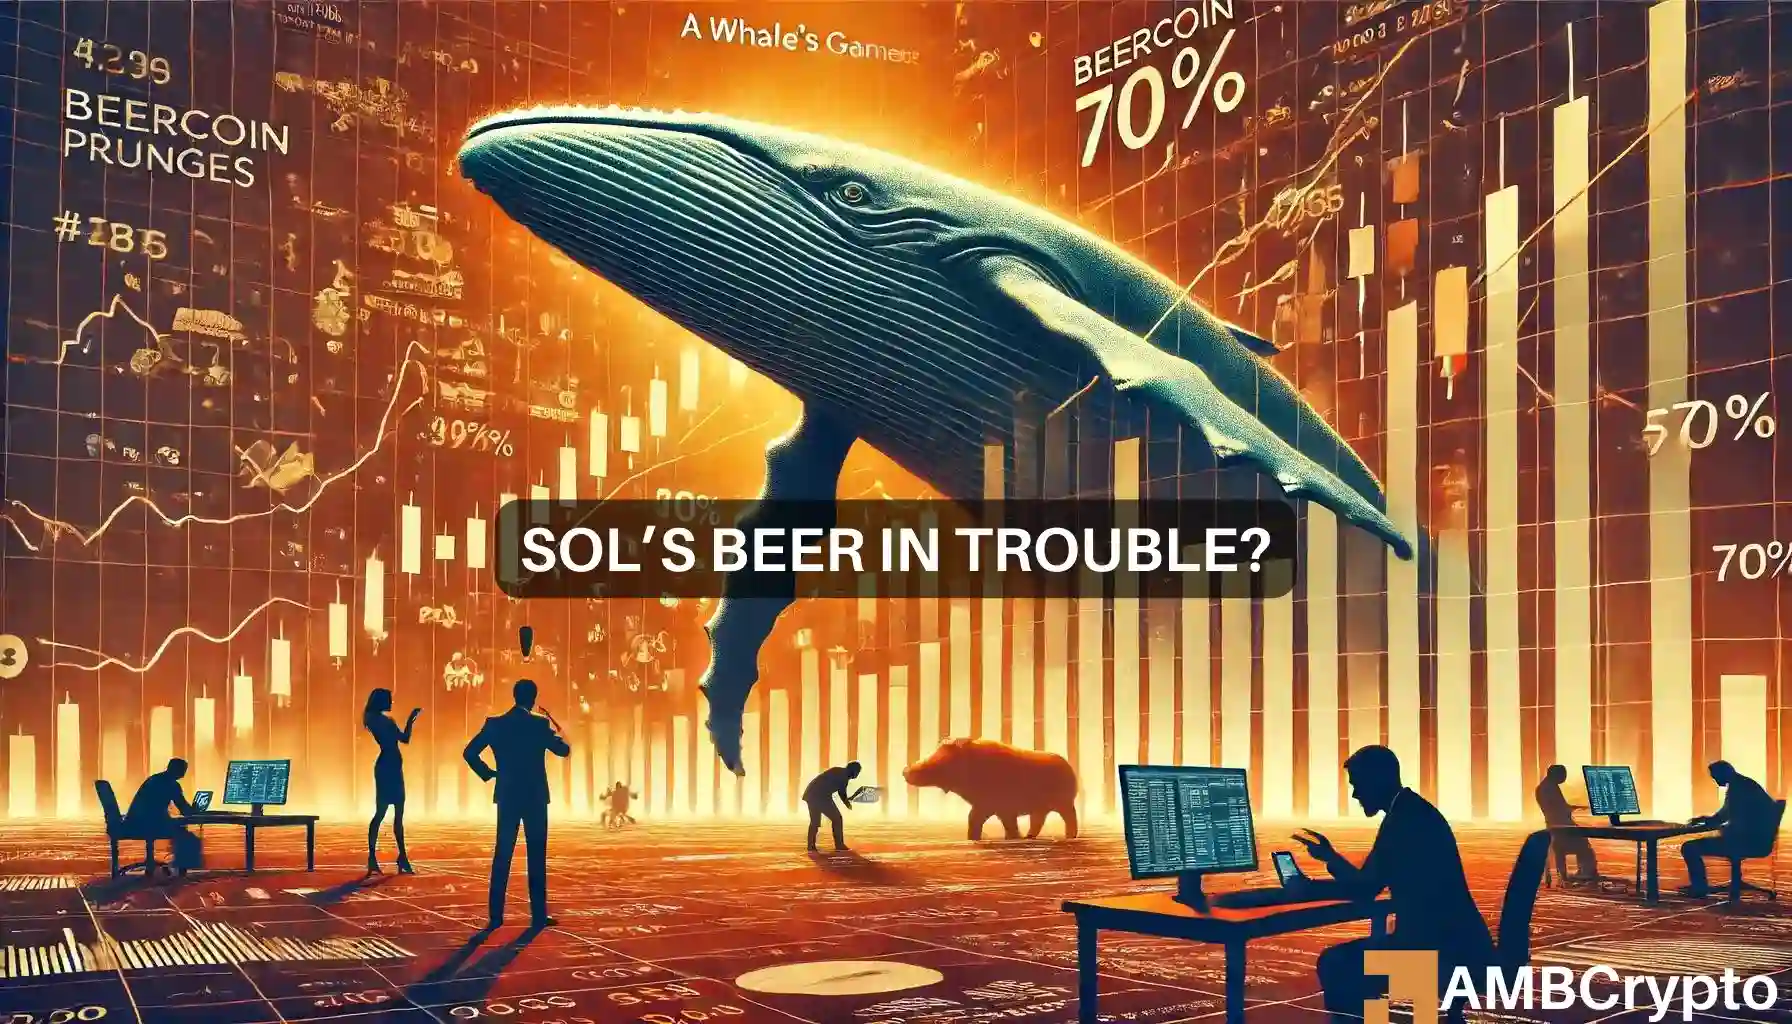 Solana’s BEERCOIN plunges 70%: Whale manipulation at play?